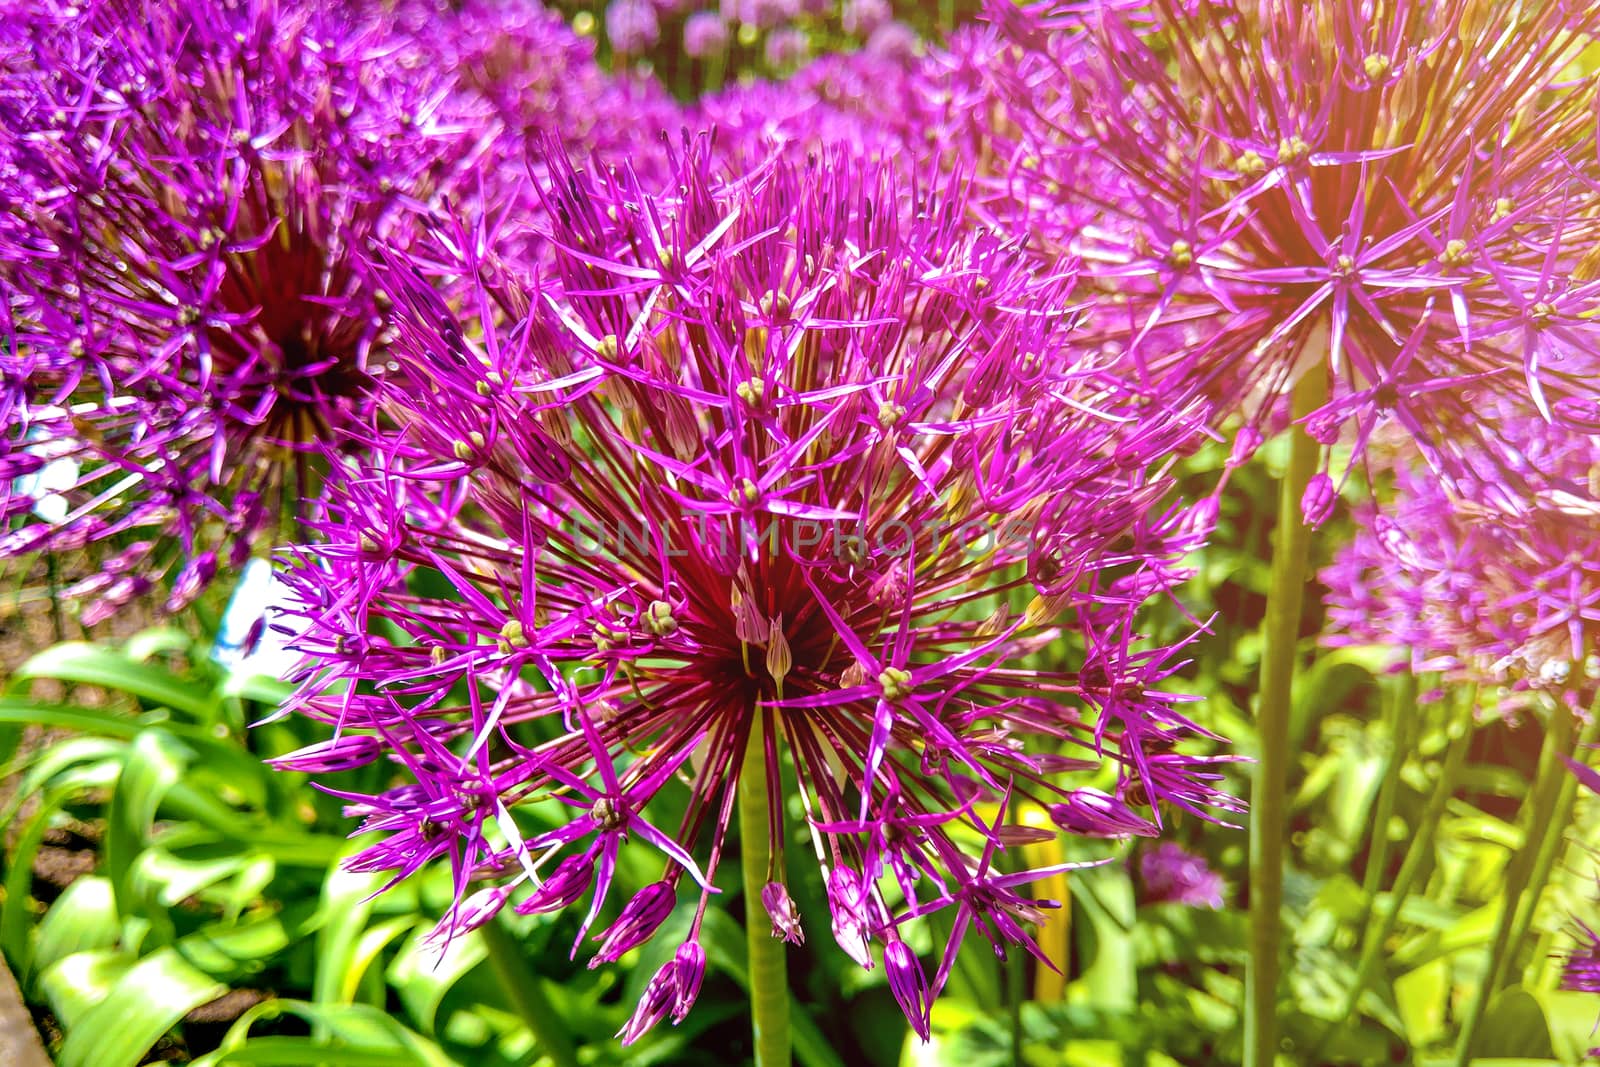 Allium Giganteum blooming. Few balls of blossoming Allium flowers. Beautiful picture with Alliums for the gardening theme. by kip02kas